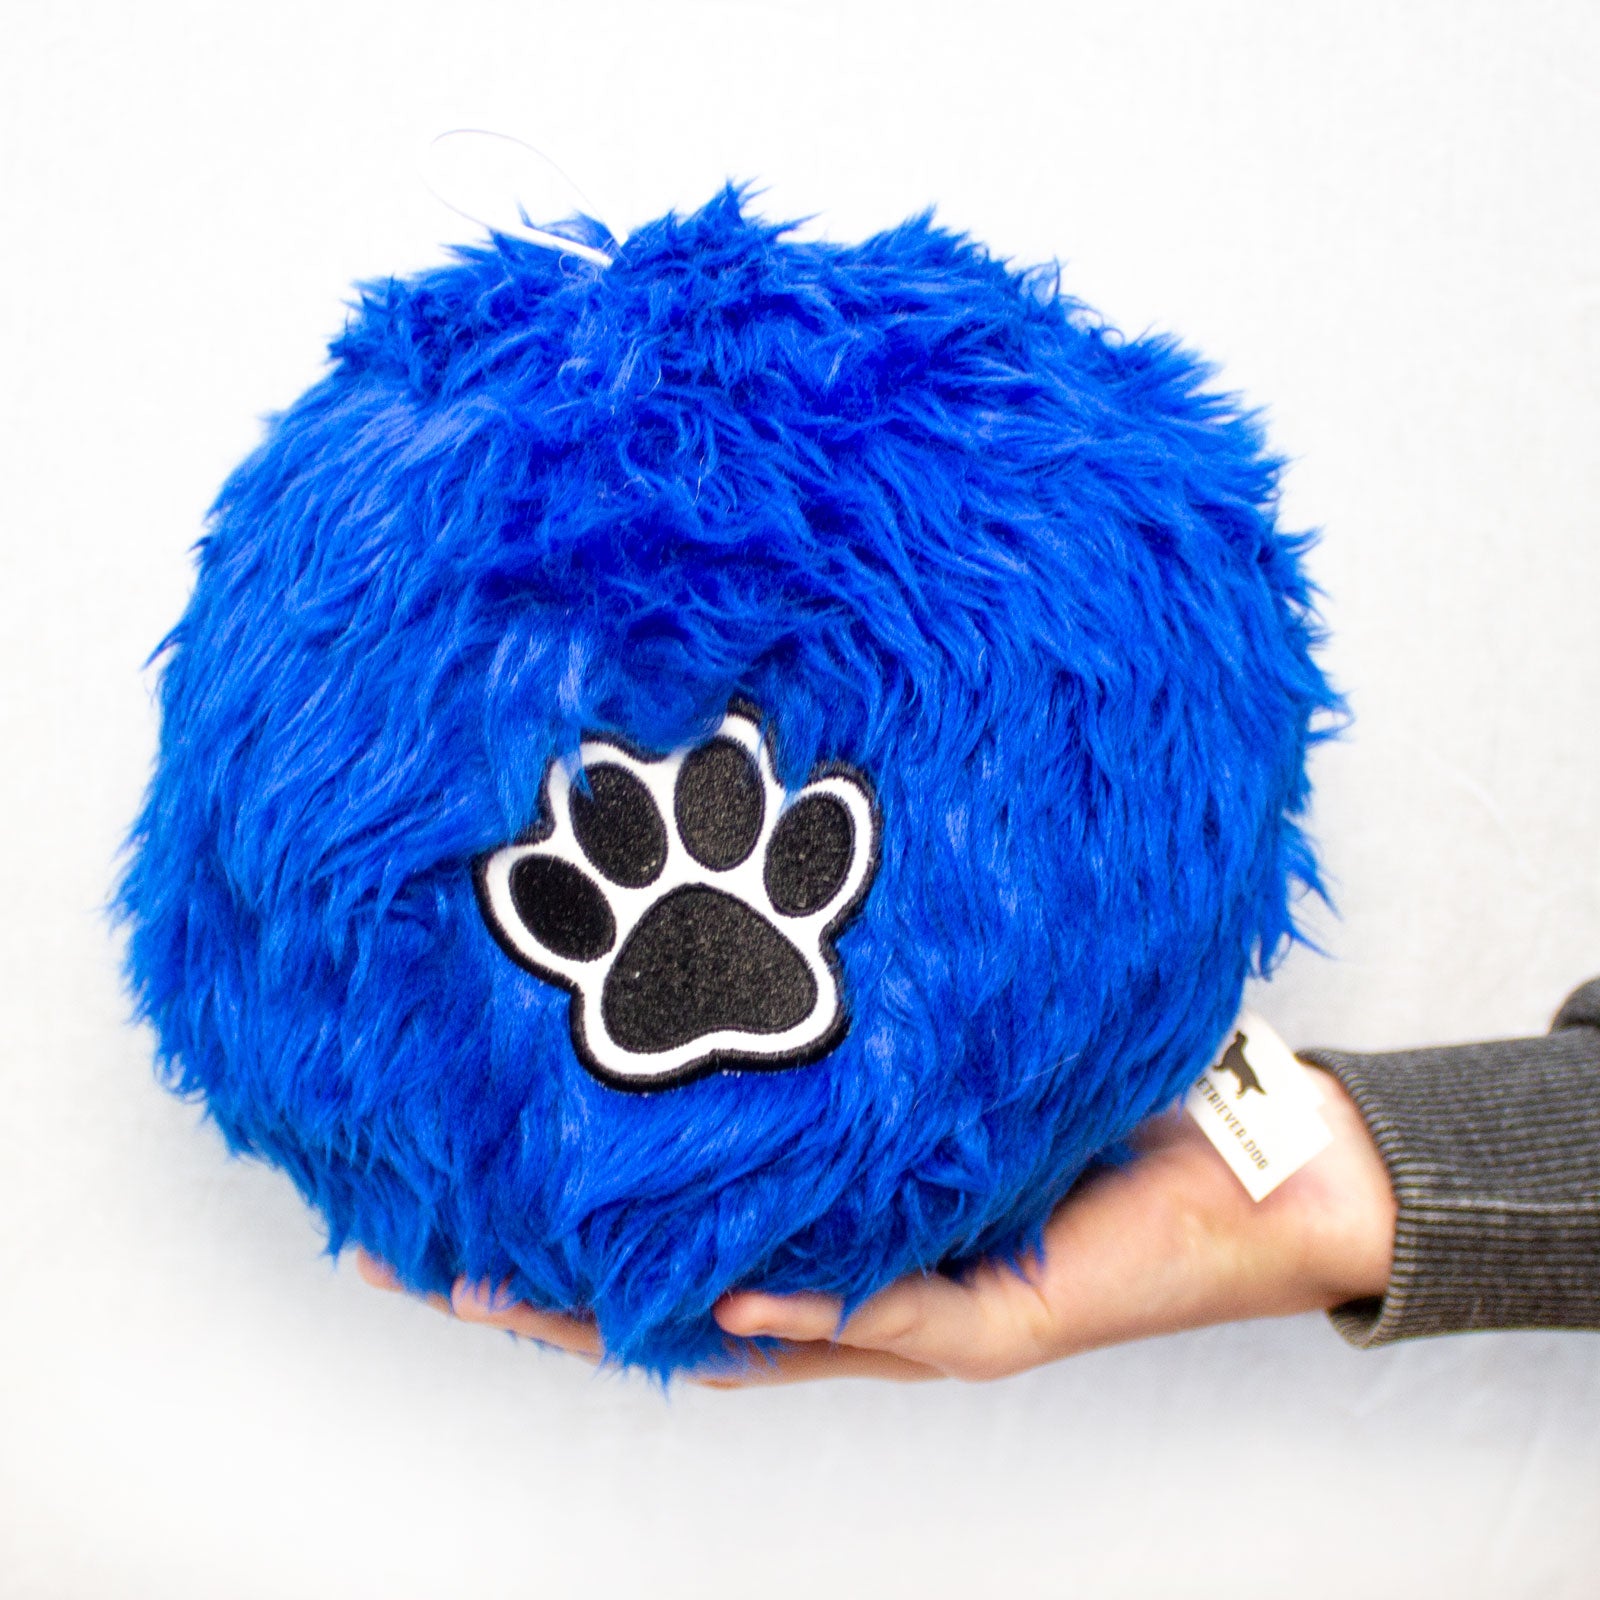 Soft Fluffy Ball For Bearded Collie Dogs - Large Size